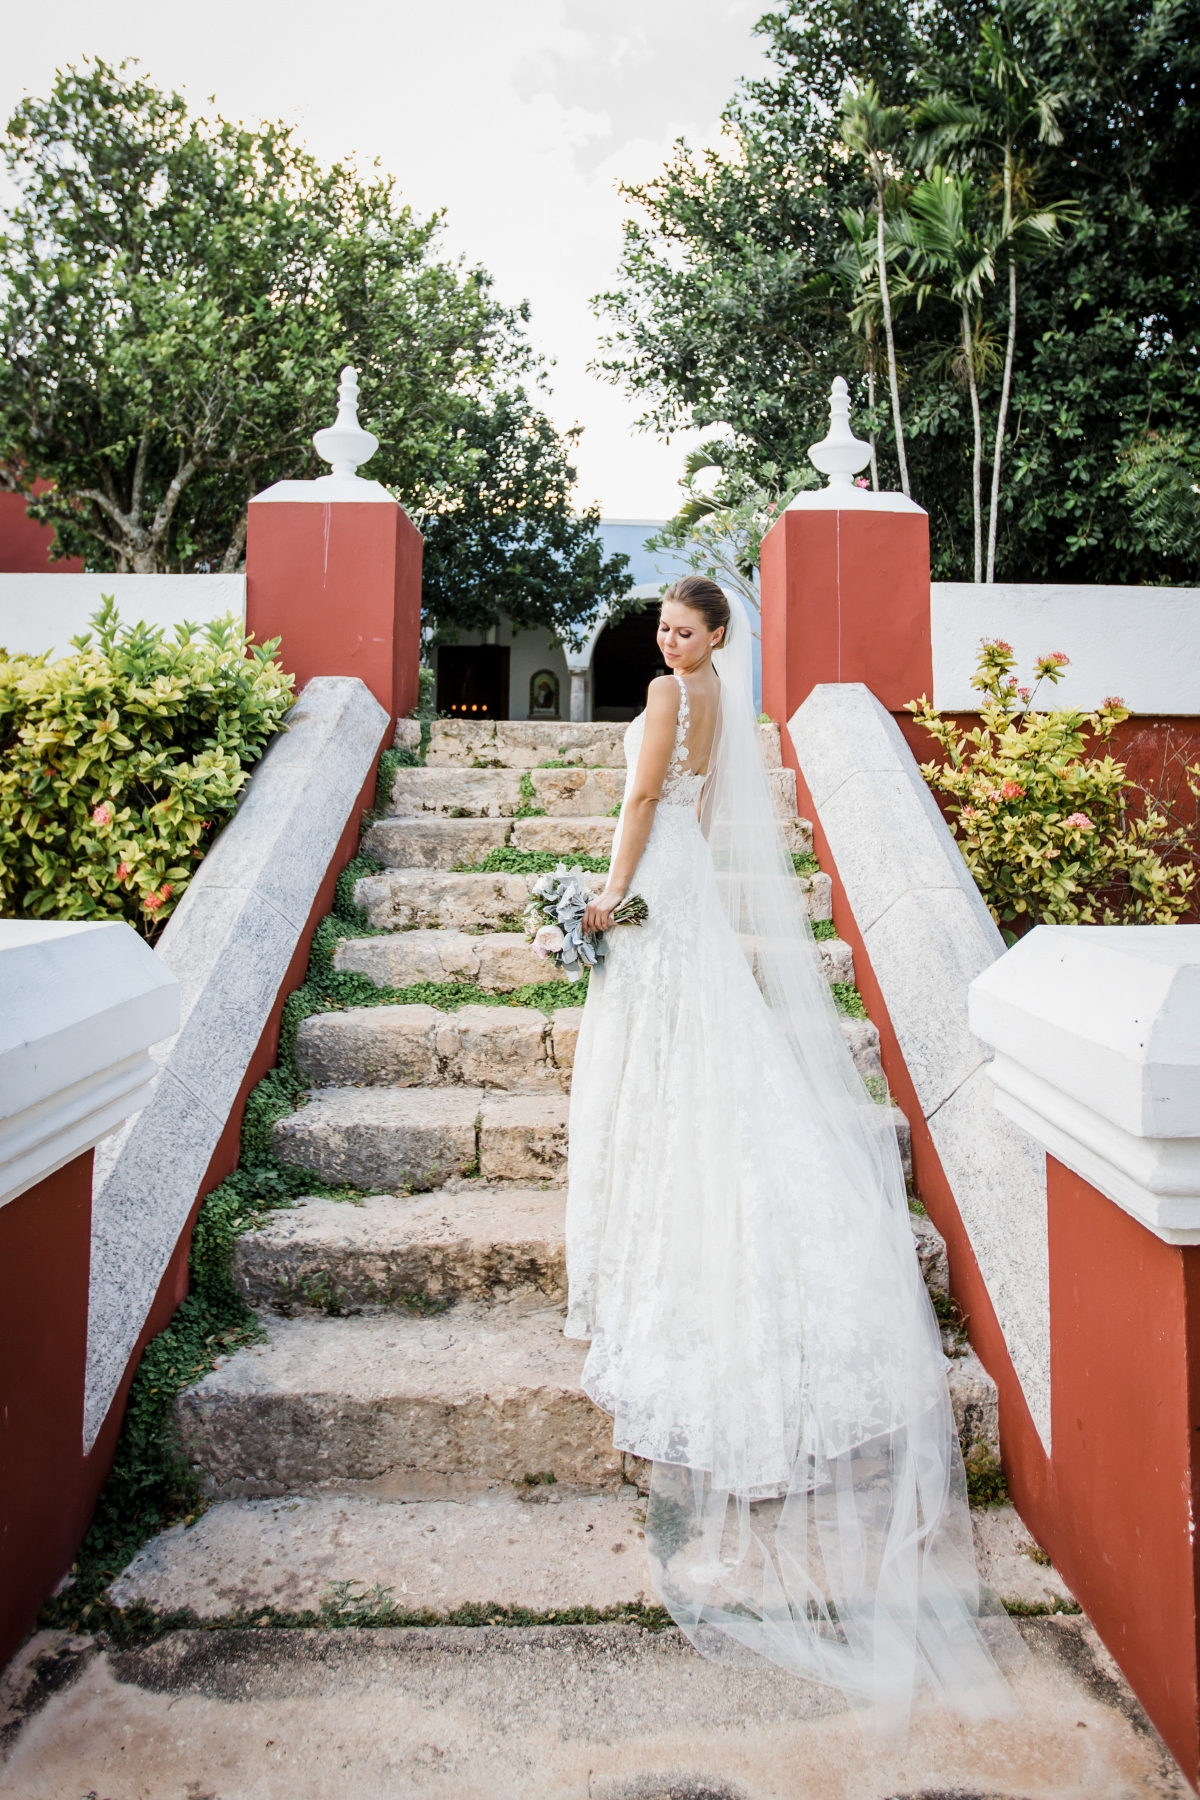  898_elizabeth medina photography 0255 Chable Photographer: Confessions of a Yucatan Bride, Yucatan Destination Wedding Photography from A Merida Bride’s Planning Diary  